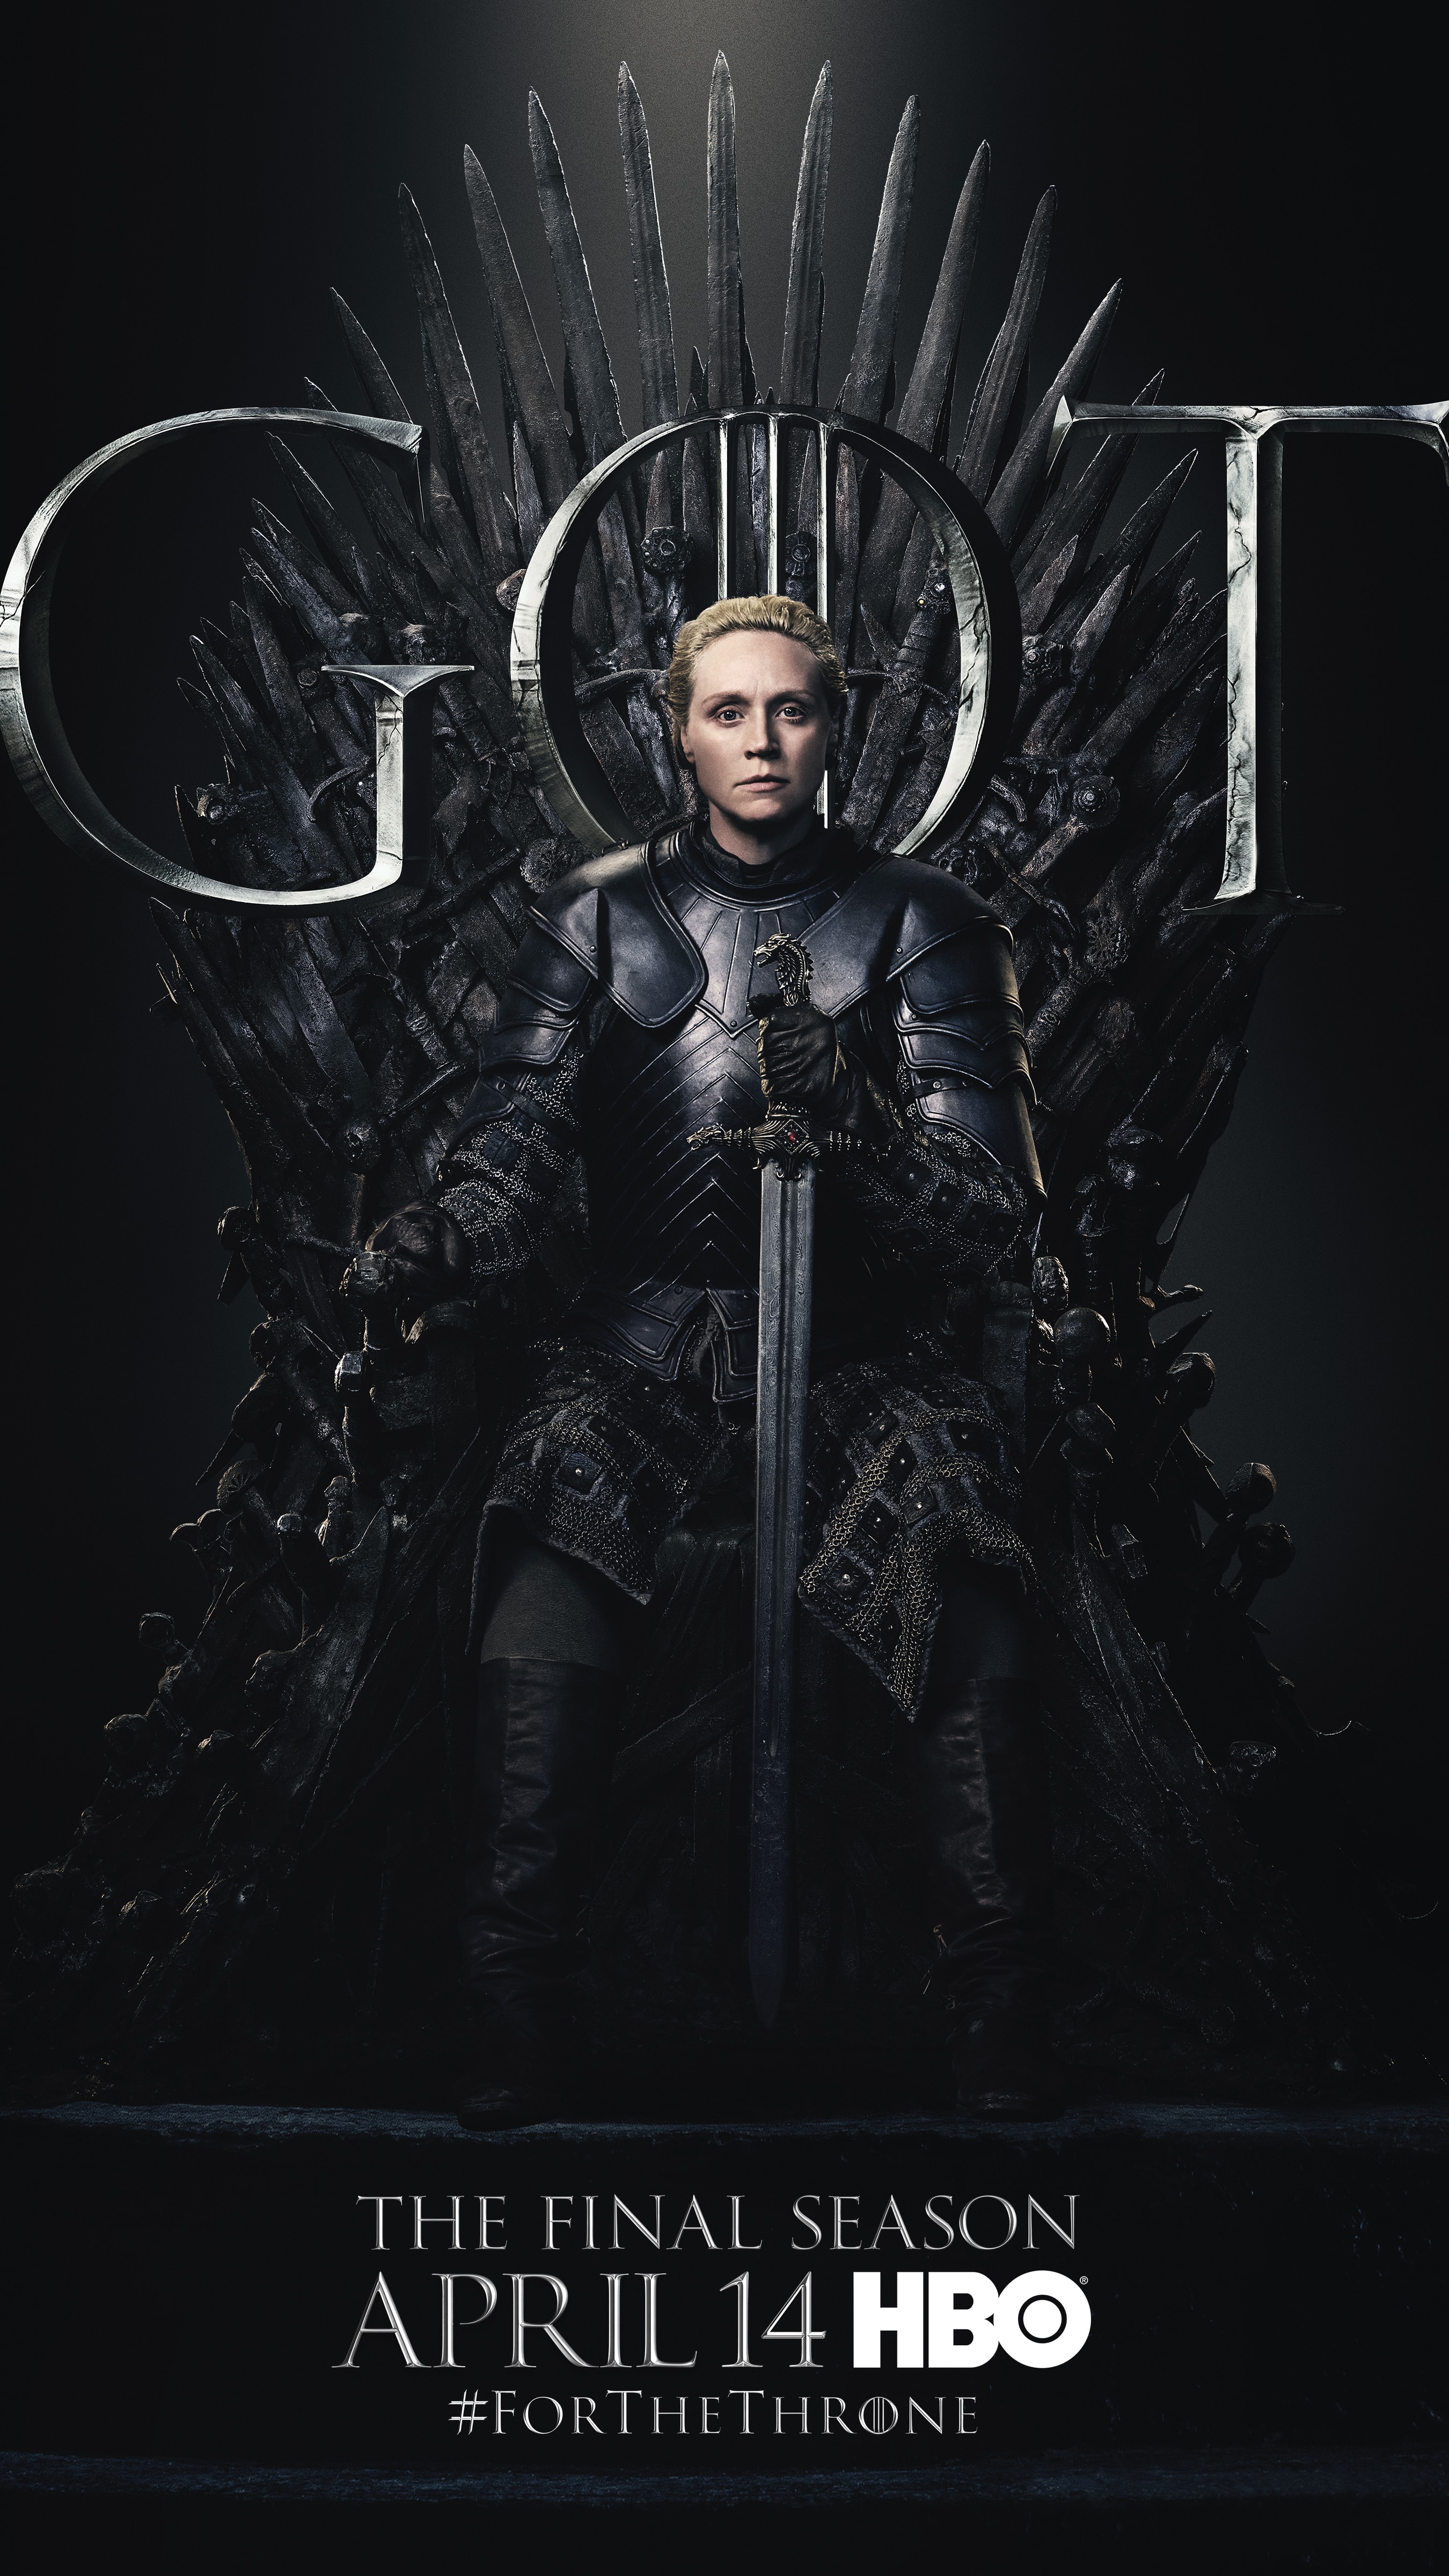 https://rozup.ir/up/justbarca/GOTS08/9.-Brienne-of-Tarth-GOT-Season-8-For-The-Throne-Character-Poster-min.jpg